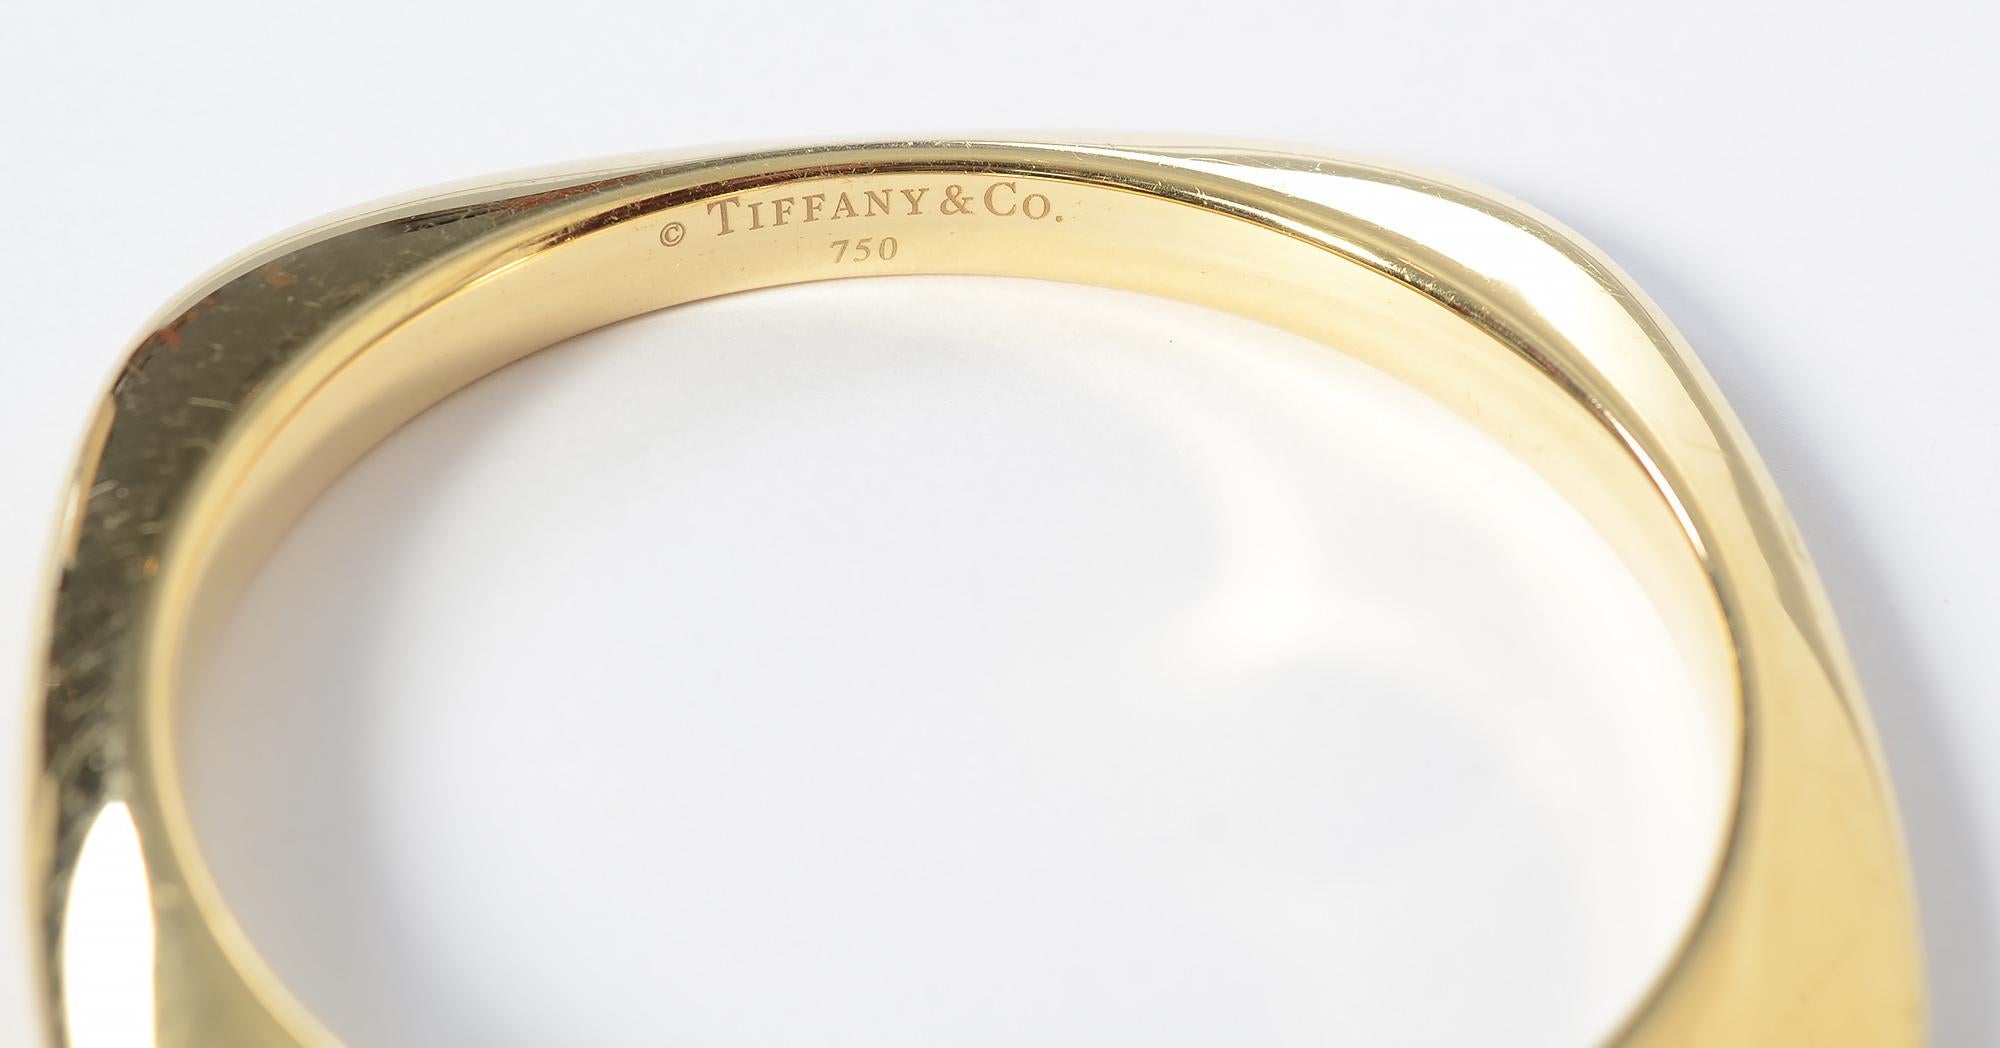 Tiffany & Co. Square Gold Bangle Bracelet In Good Condition For Sale In Darnestown, MD